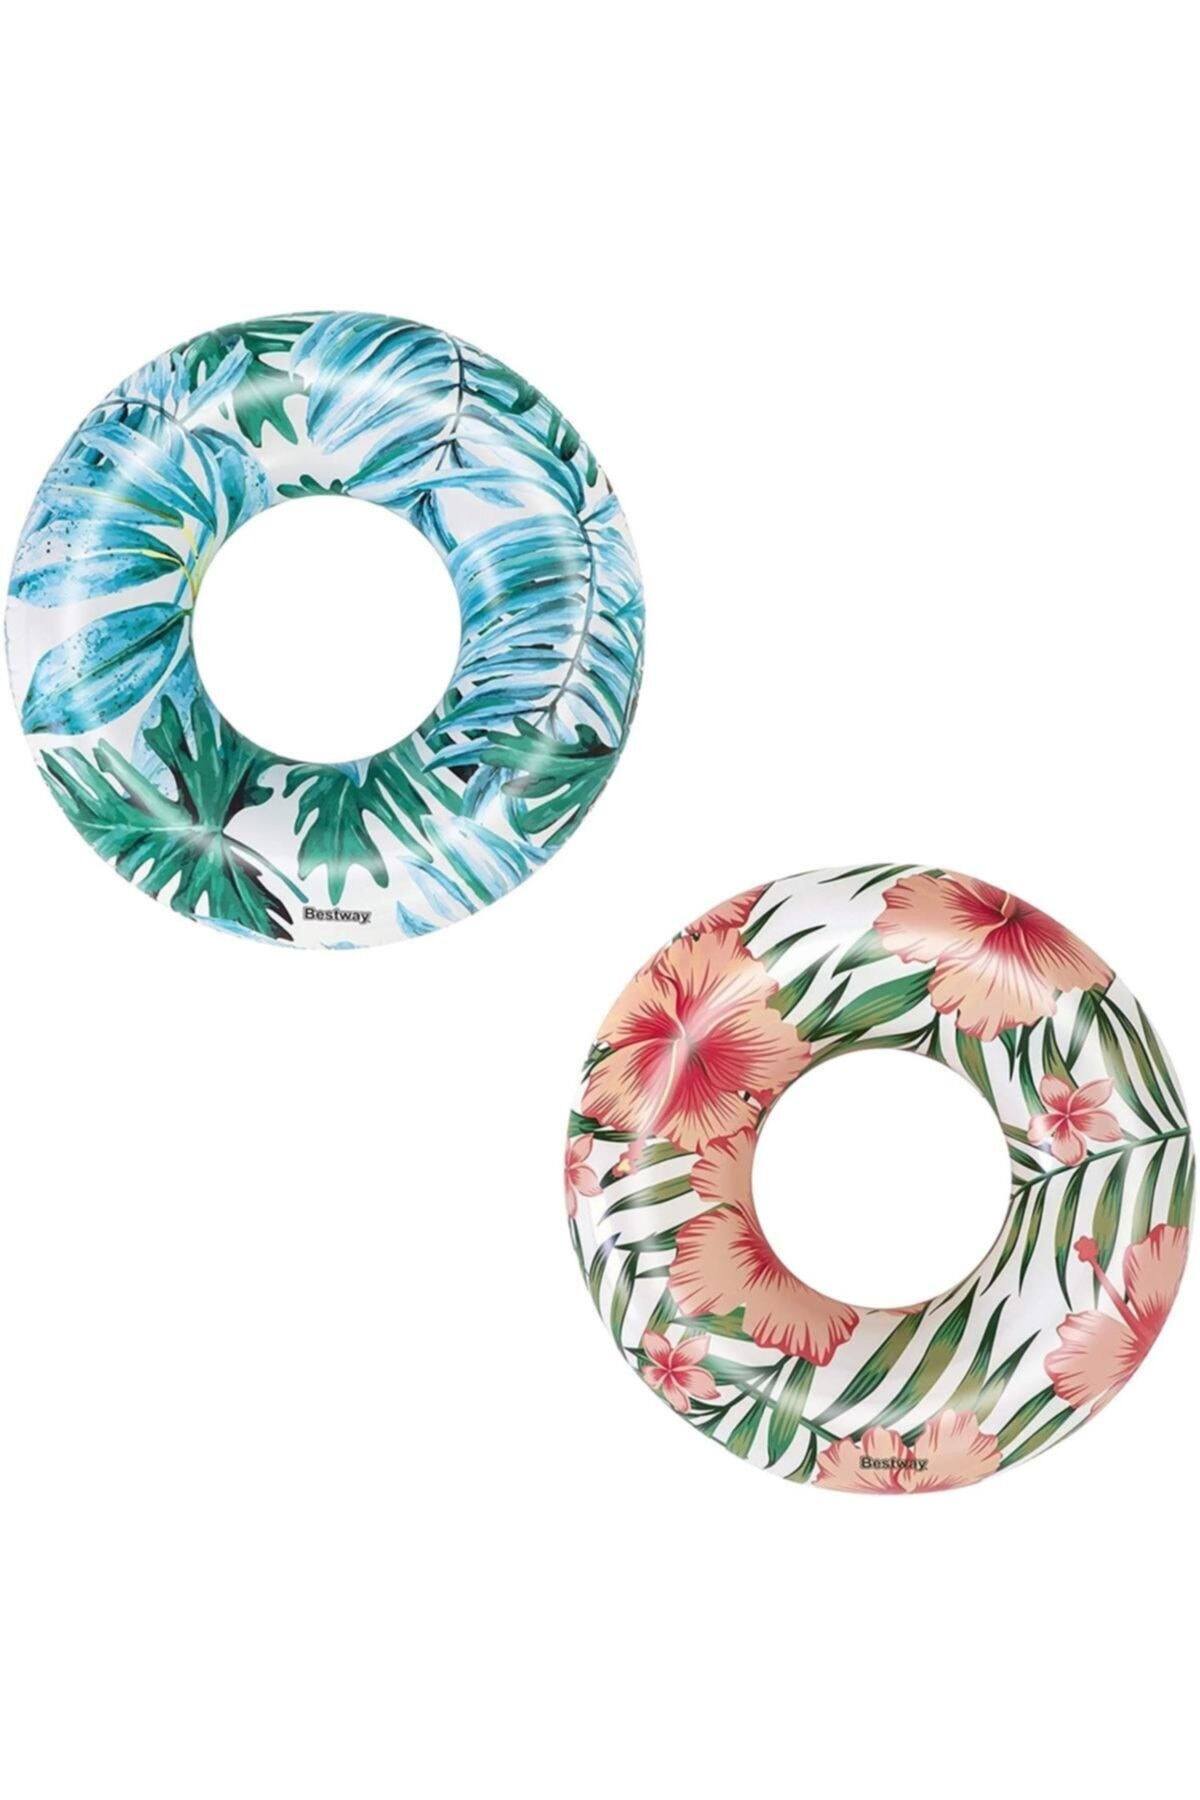 Tropical Palm Tree Patterned Bagel 119 Cm 36237